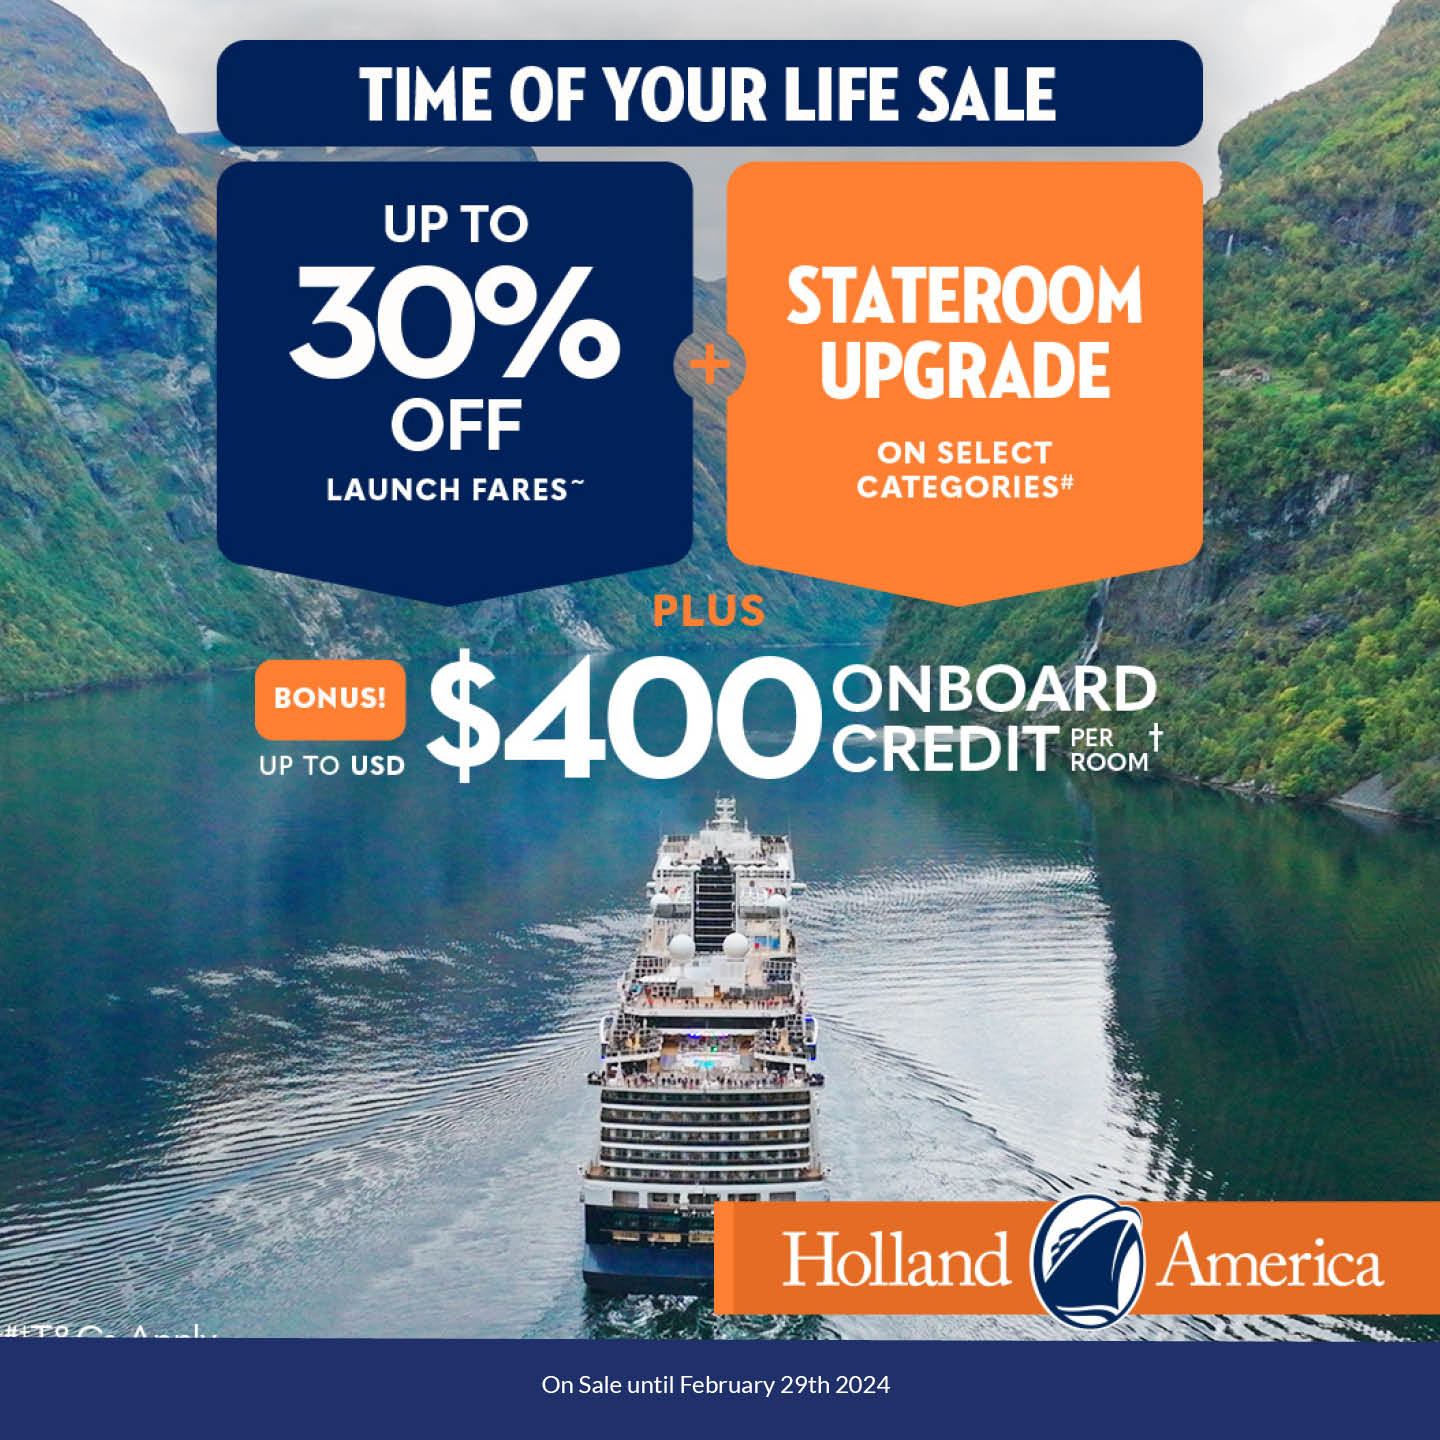 Holland America Cruise Deals departing from Sydney onboard MS Noordam